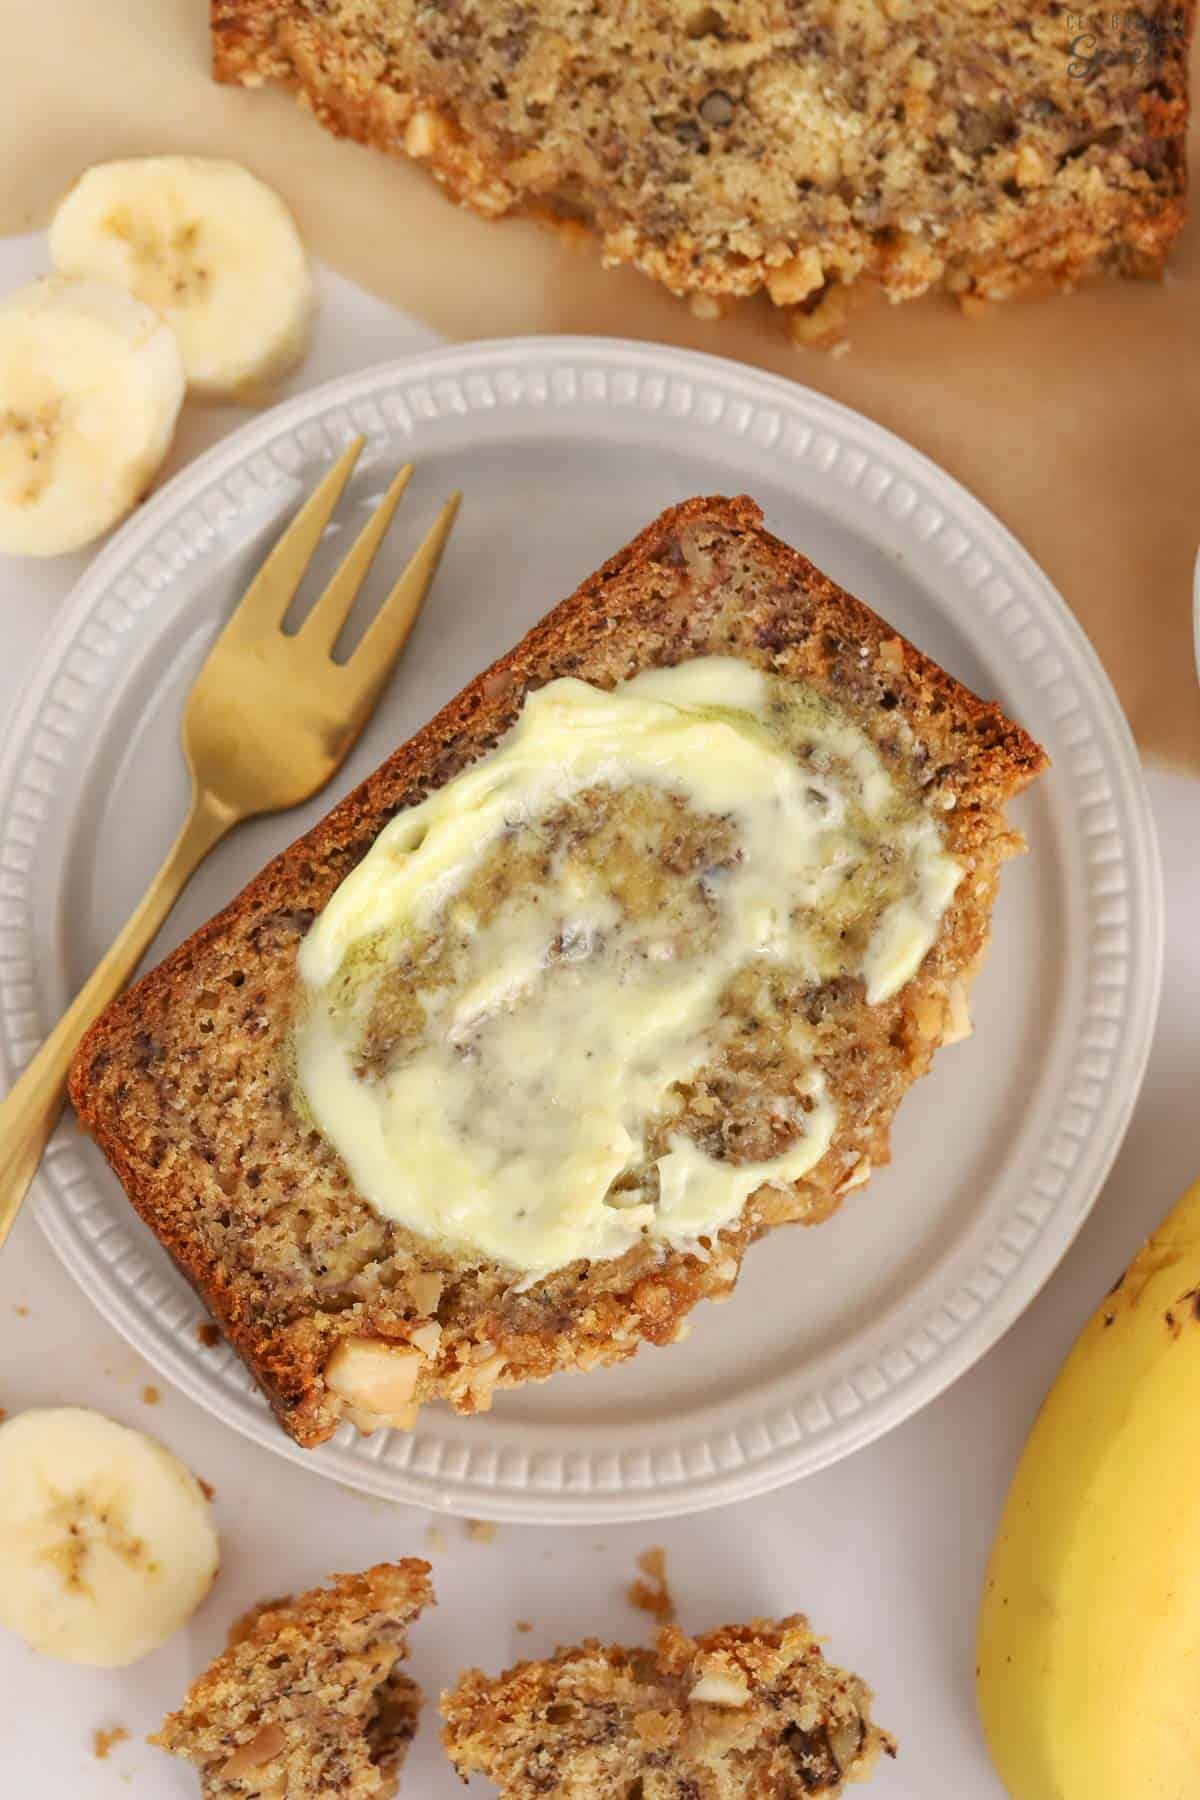 Slice of banana nut bread topped with butter on a grey plate.